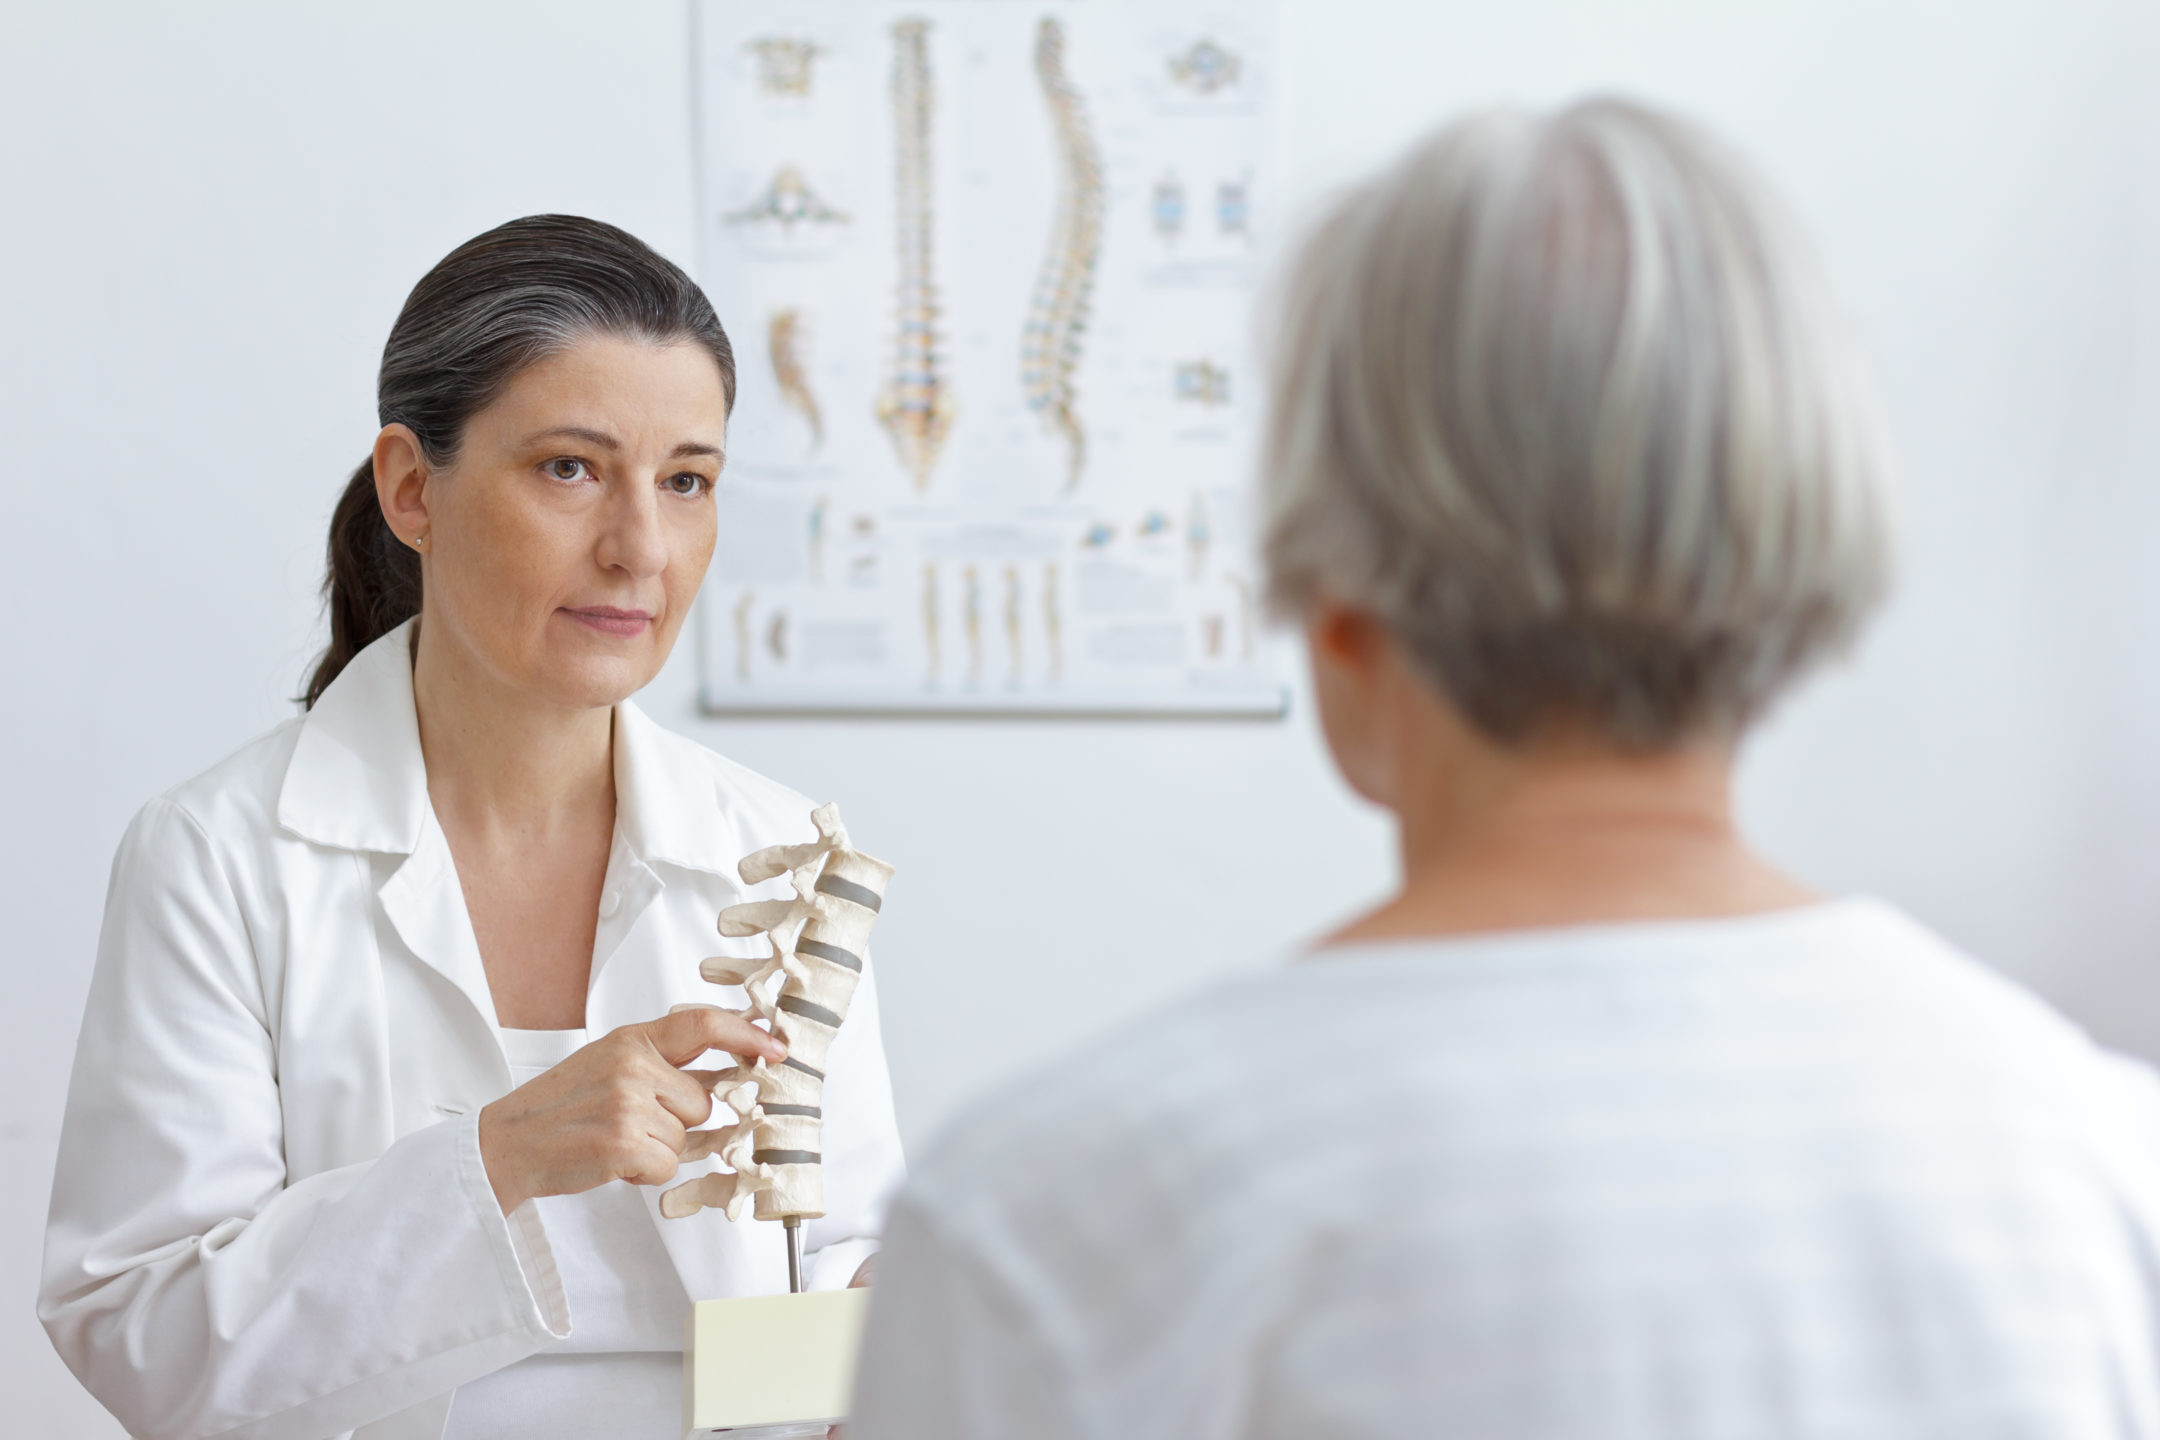  A doctor uses a model of a spine to show a patient a disc.